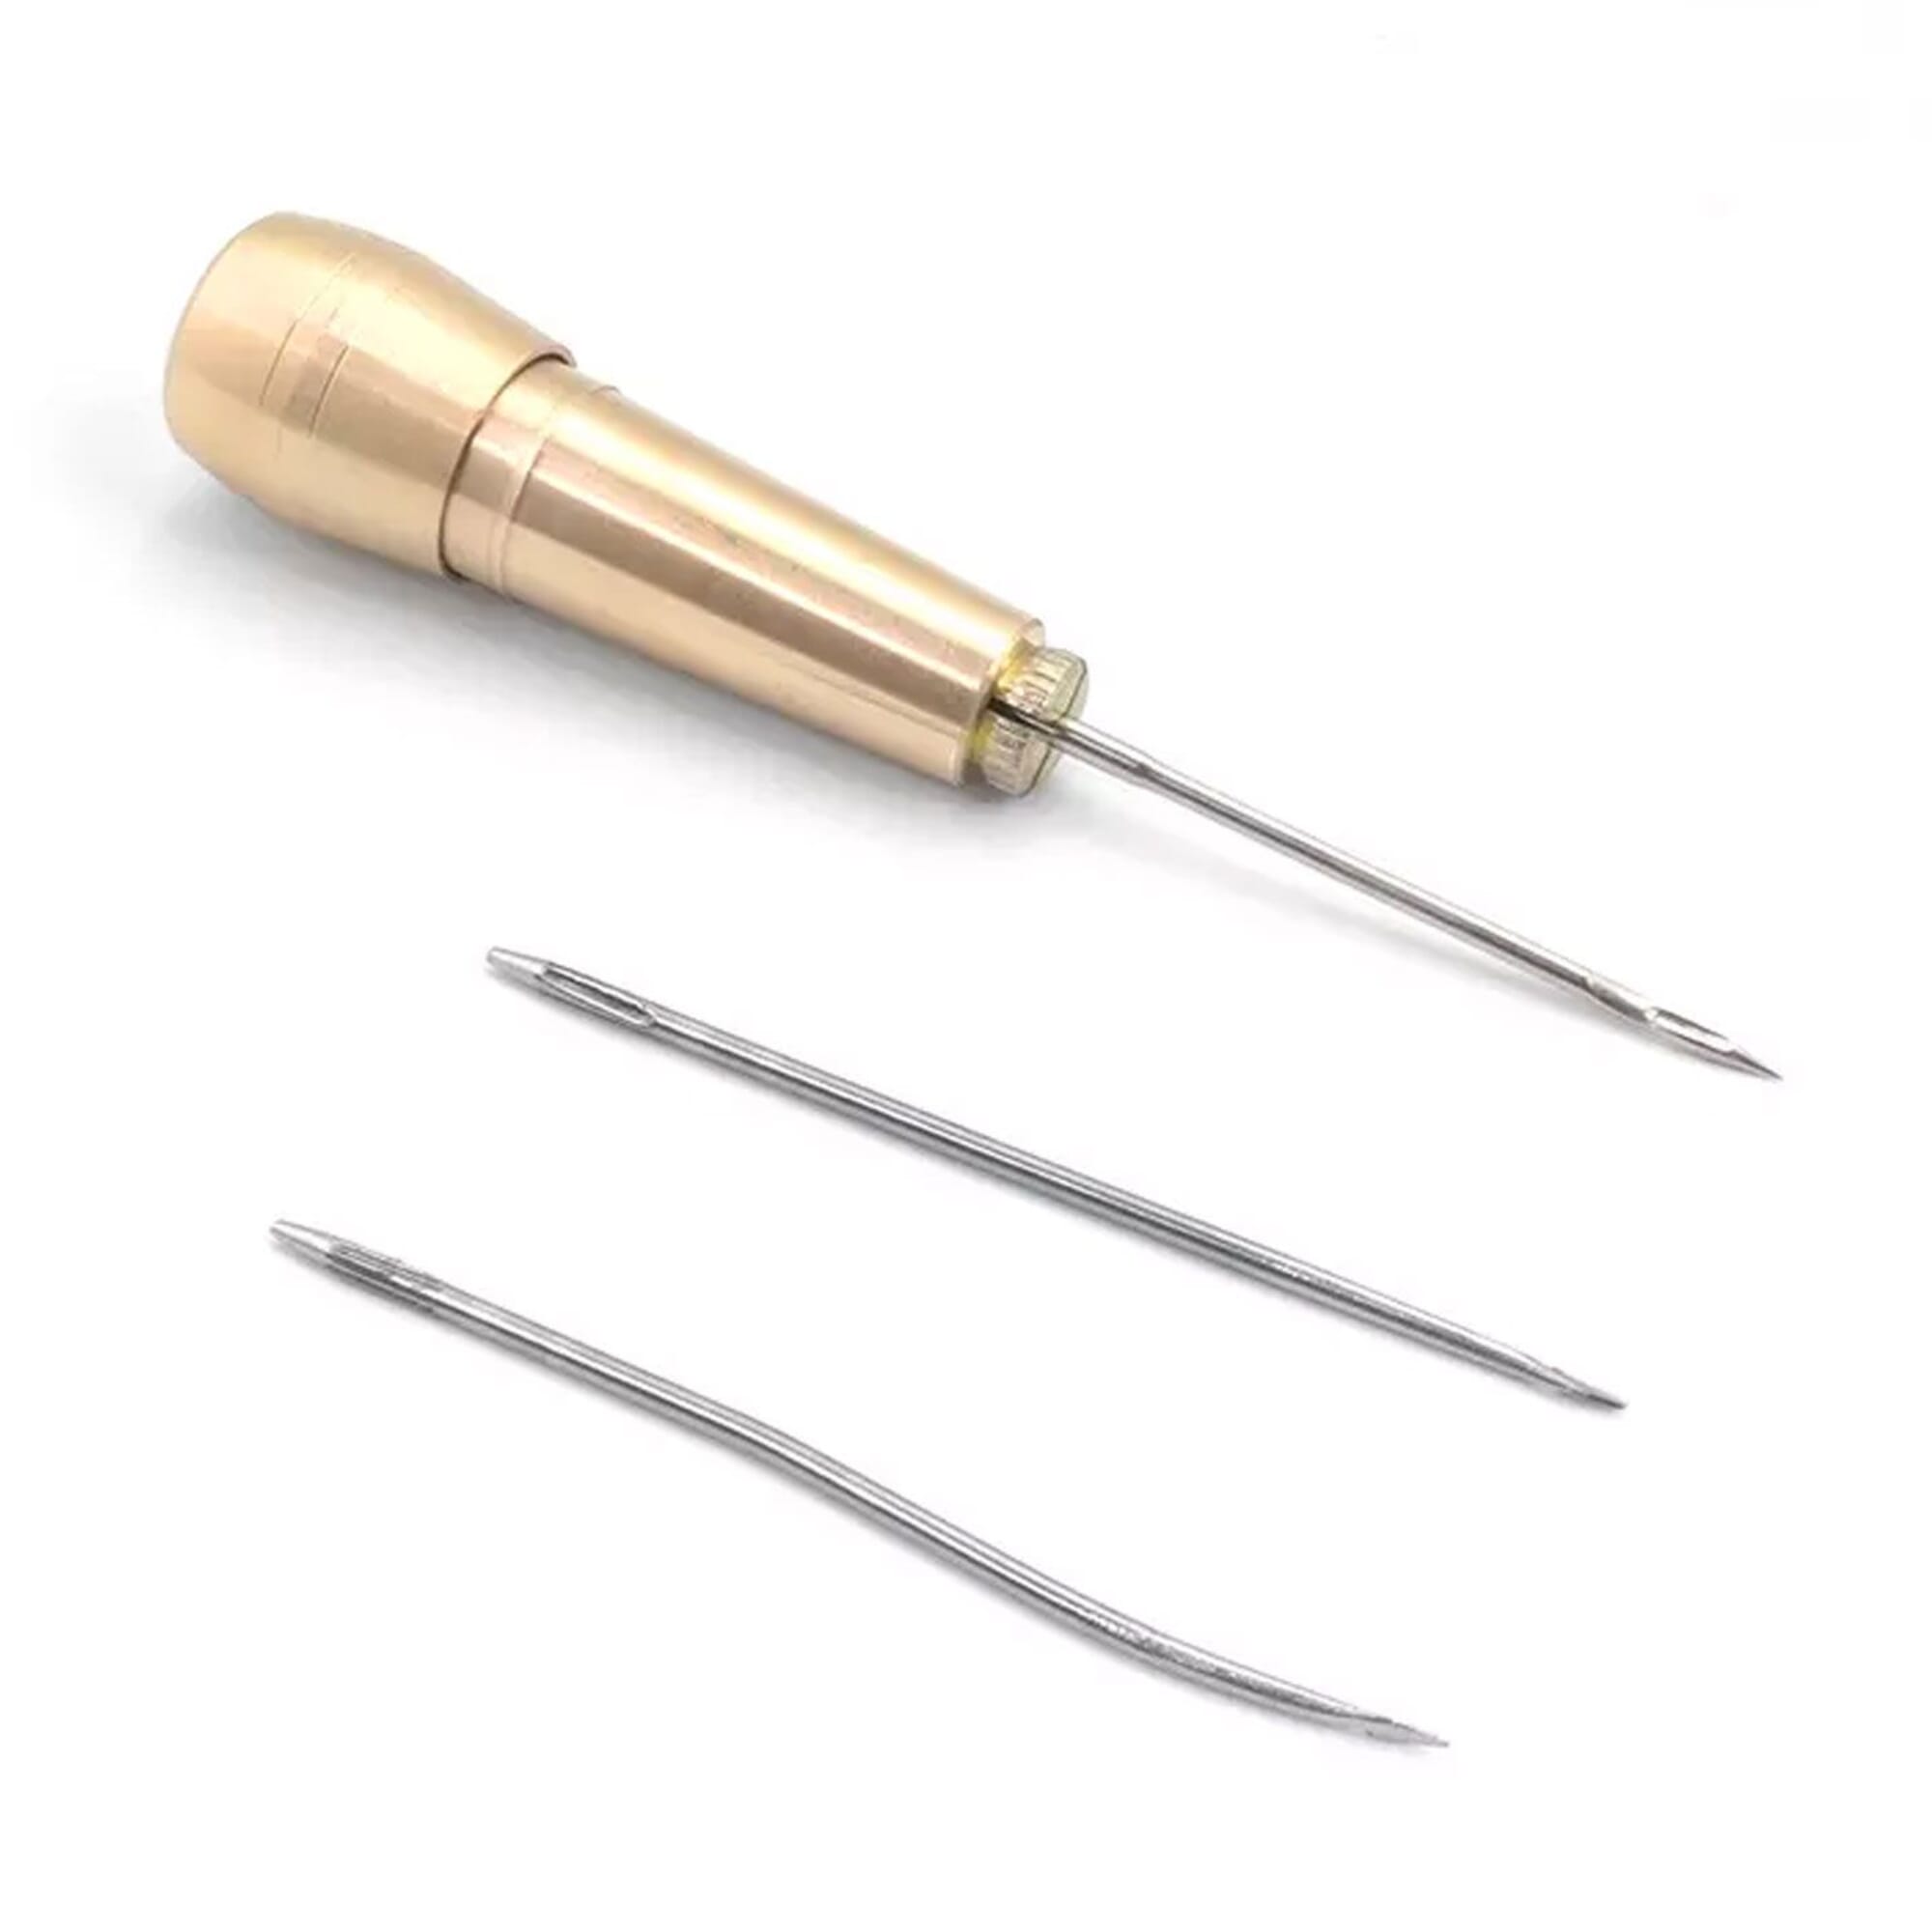 5 Pieces Sewing Awl Kit, Leather Sewing Awl Stitching Leather Craft Awl  with Needles (Straight and Bent), Coil and 200 Meters Waxed Threads for DIY